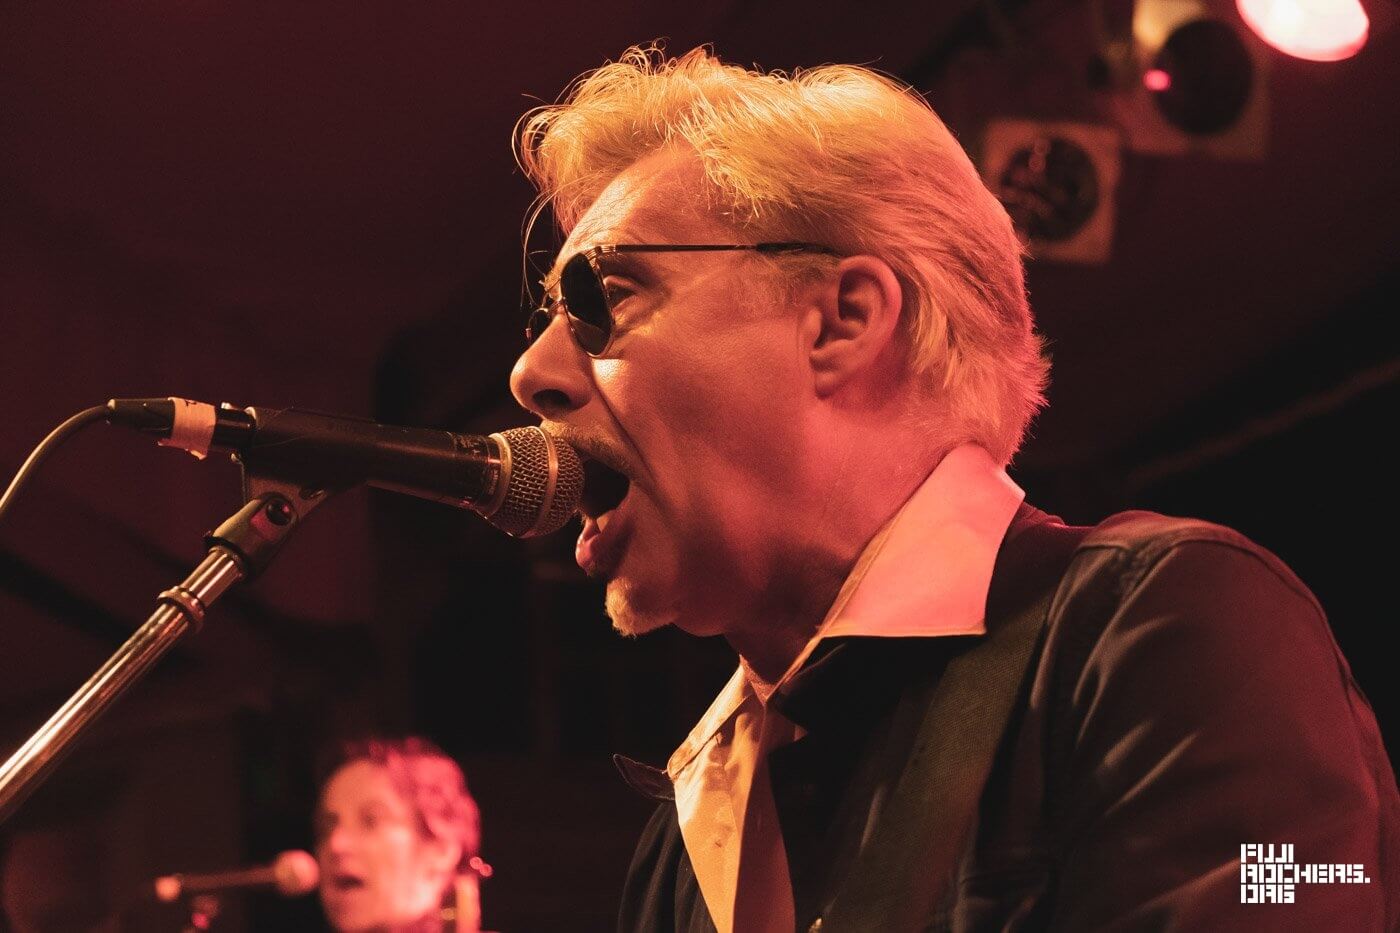 GLEN MATLOCK AND THE TOUGH COOKIES featuring EARL SLICK